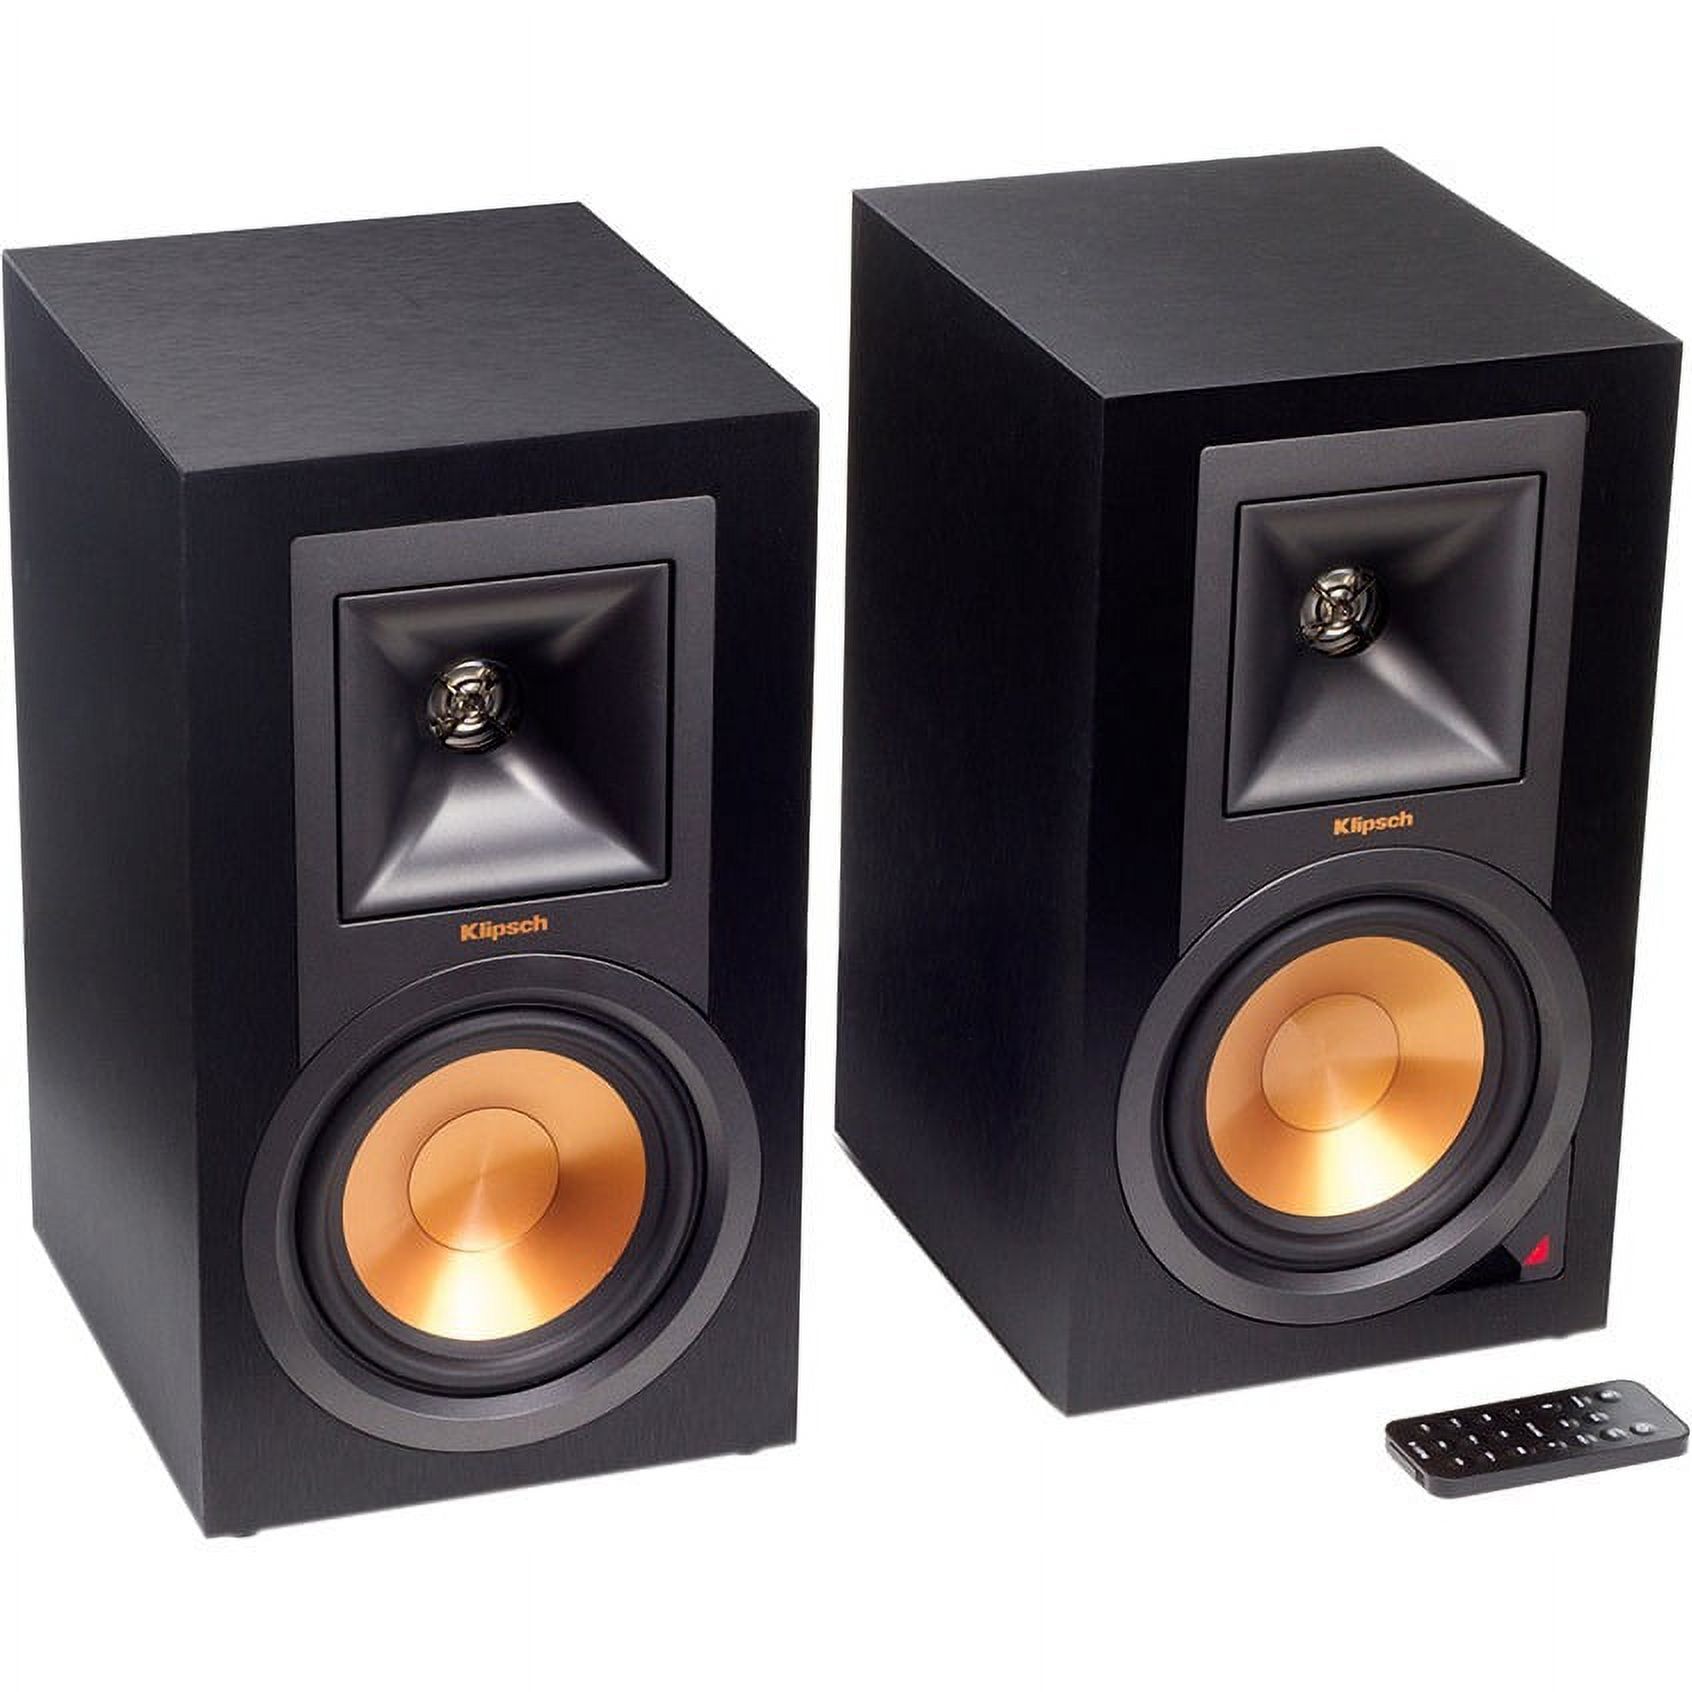 Klipsch R-15PM Powered Monitors, 2 Self Powered Easy to Use Speakers and Wireless Bluetooth Technology, Digital Optical and Analog RCA and USB Inputs. - image 1 of 8